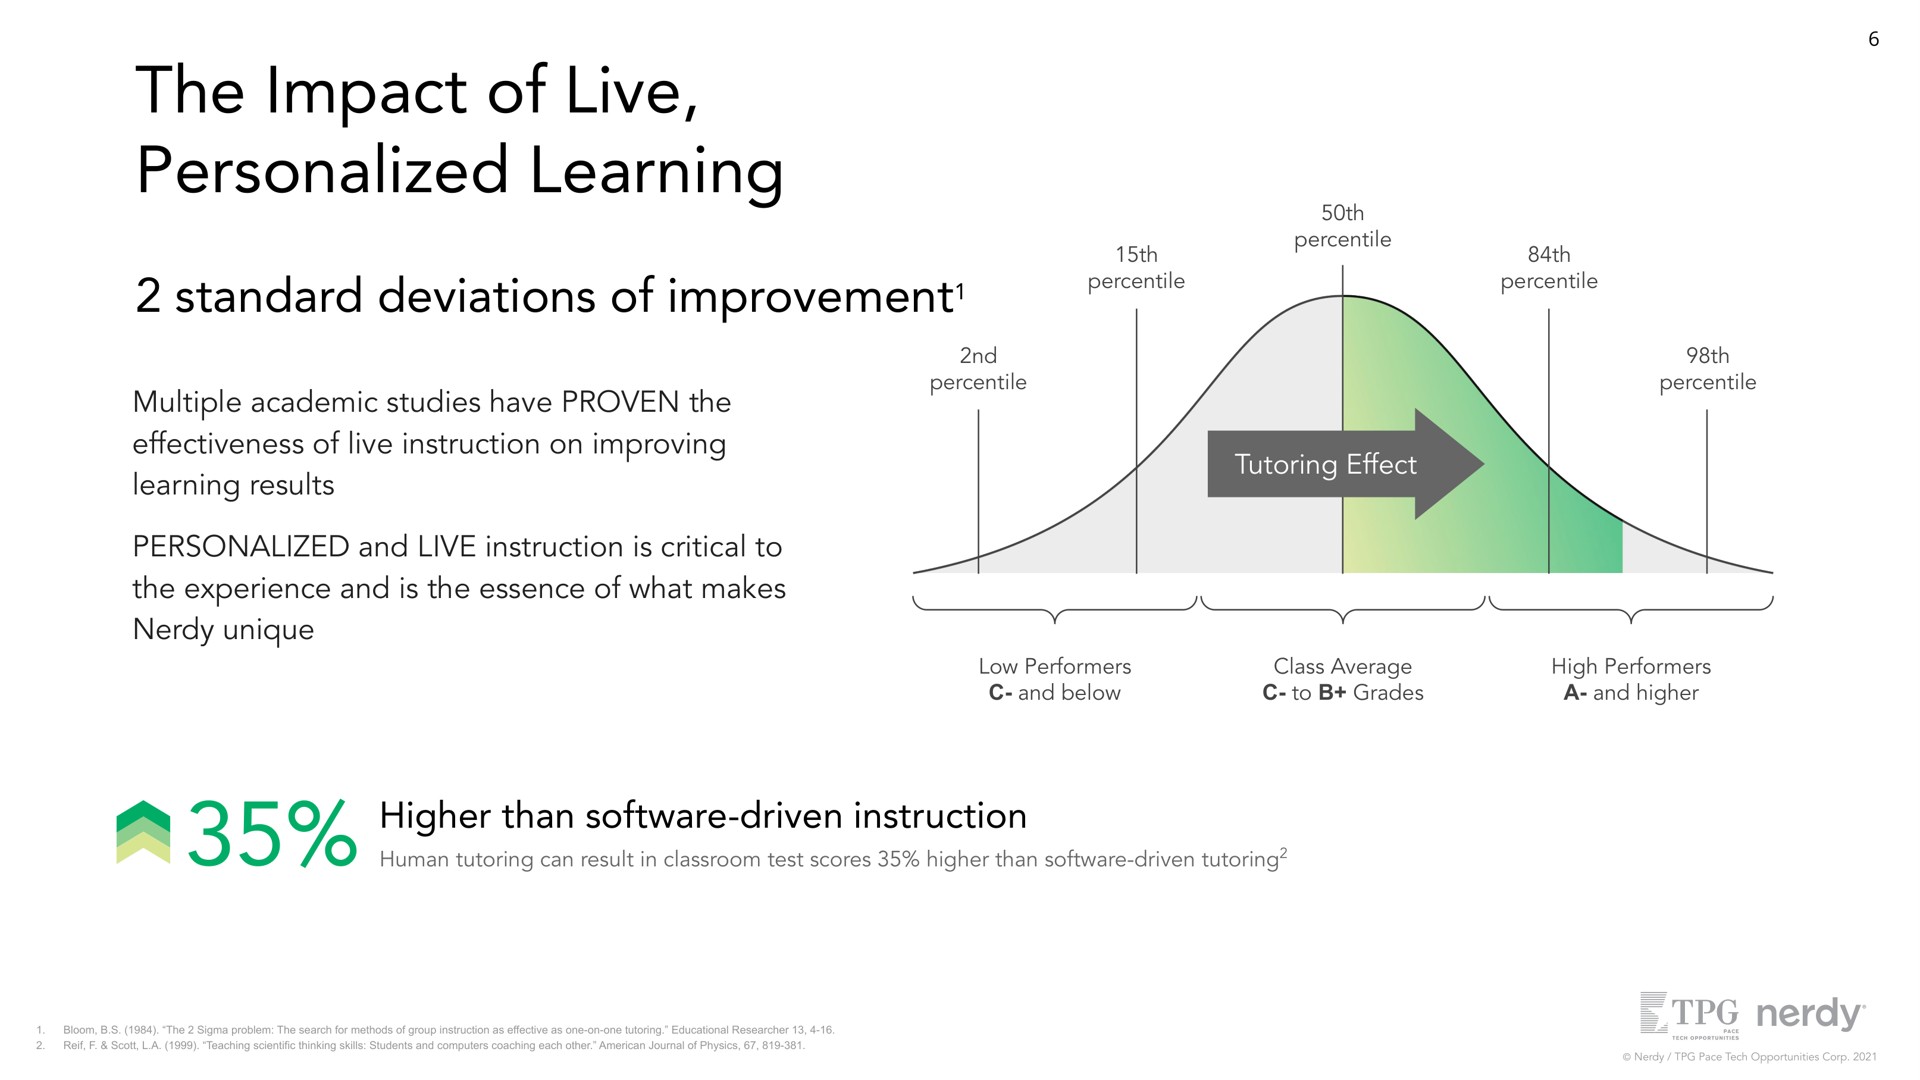 the impact of live personalized learning standard deviations of improvement multiple academic studies have proven the effectiveness of live instruction on improving learning results personalized and live instruction is critical to the experience and is the essence of what makes unique tutoring effect higher than driven instruction | Nerdy